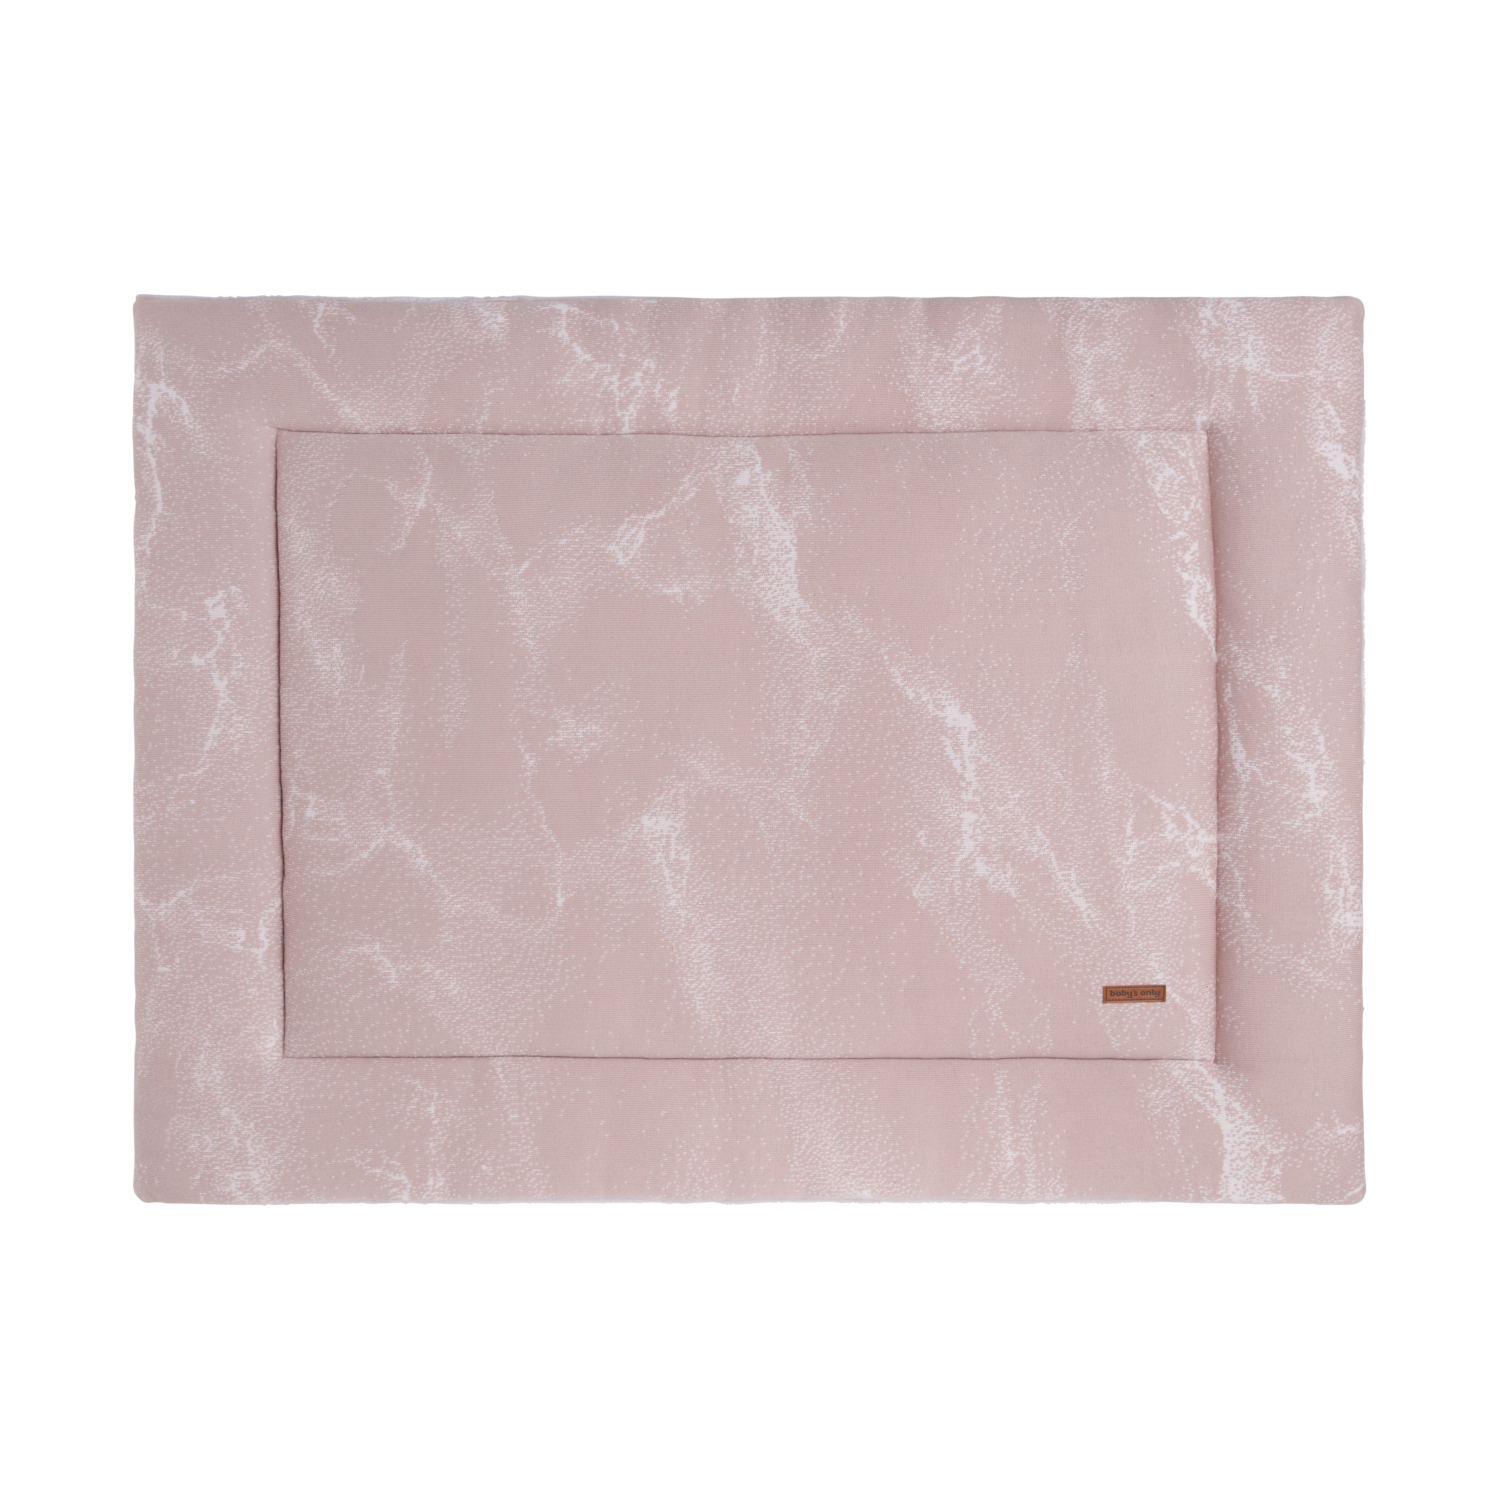 Baby's Only Marble Boxkleed Oudroze / Classic Roze 75 x 95 cm oud roze